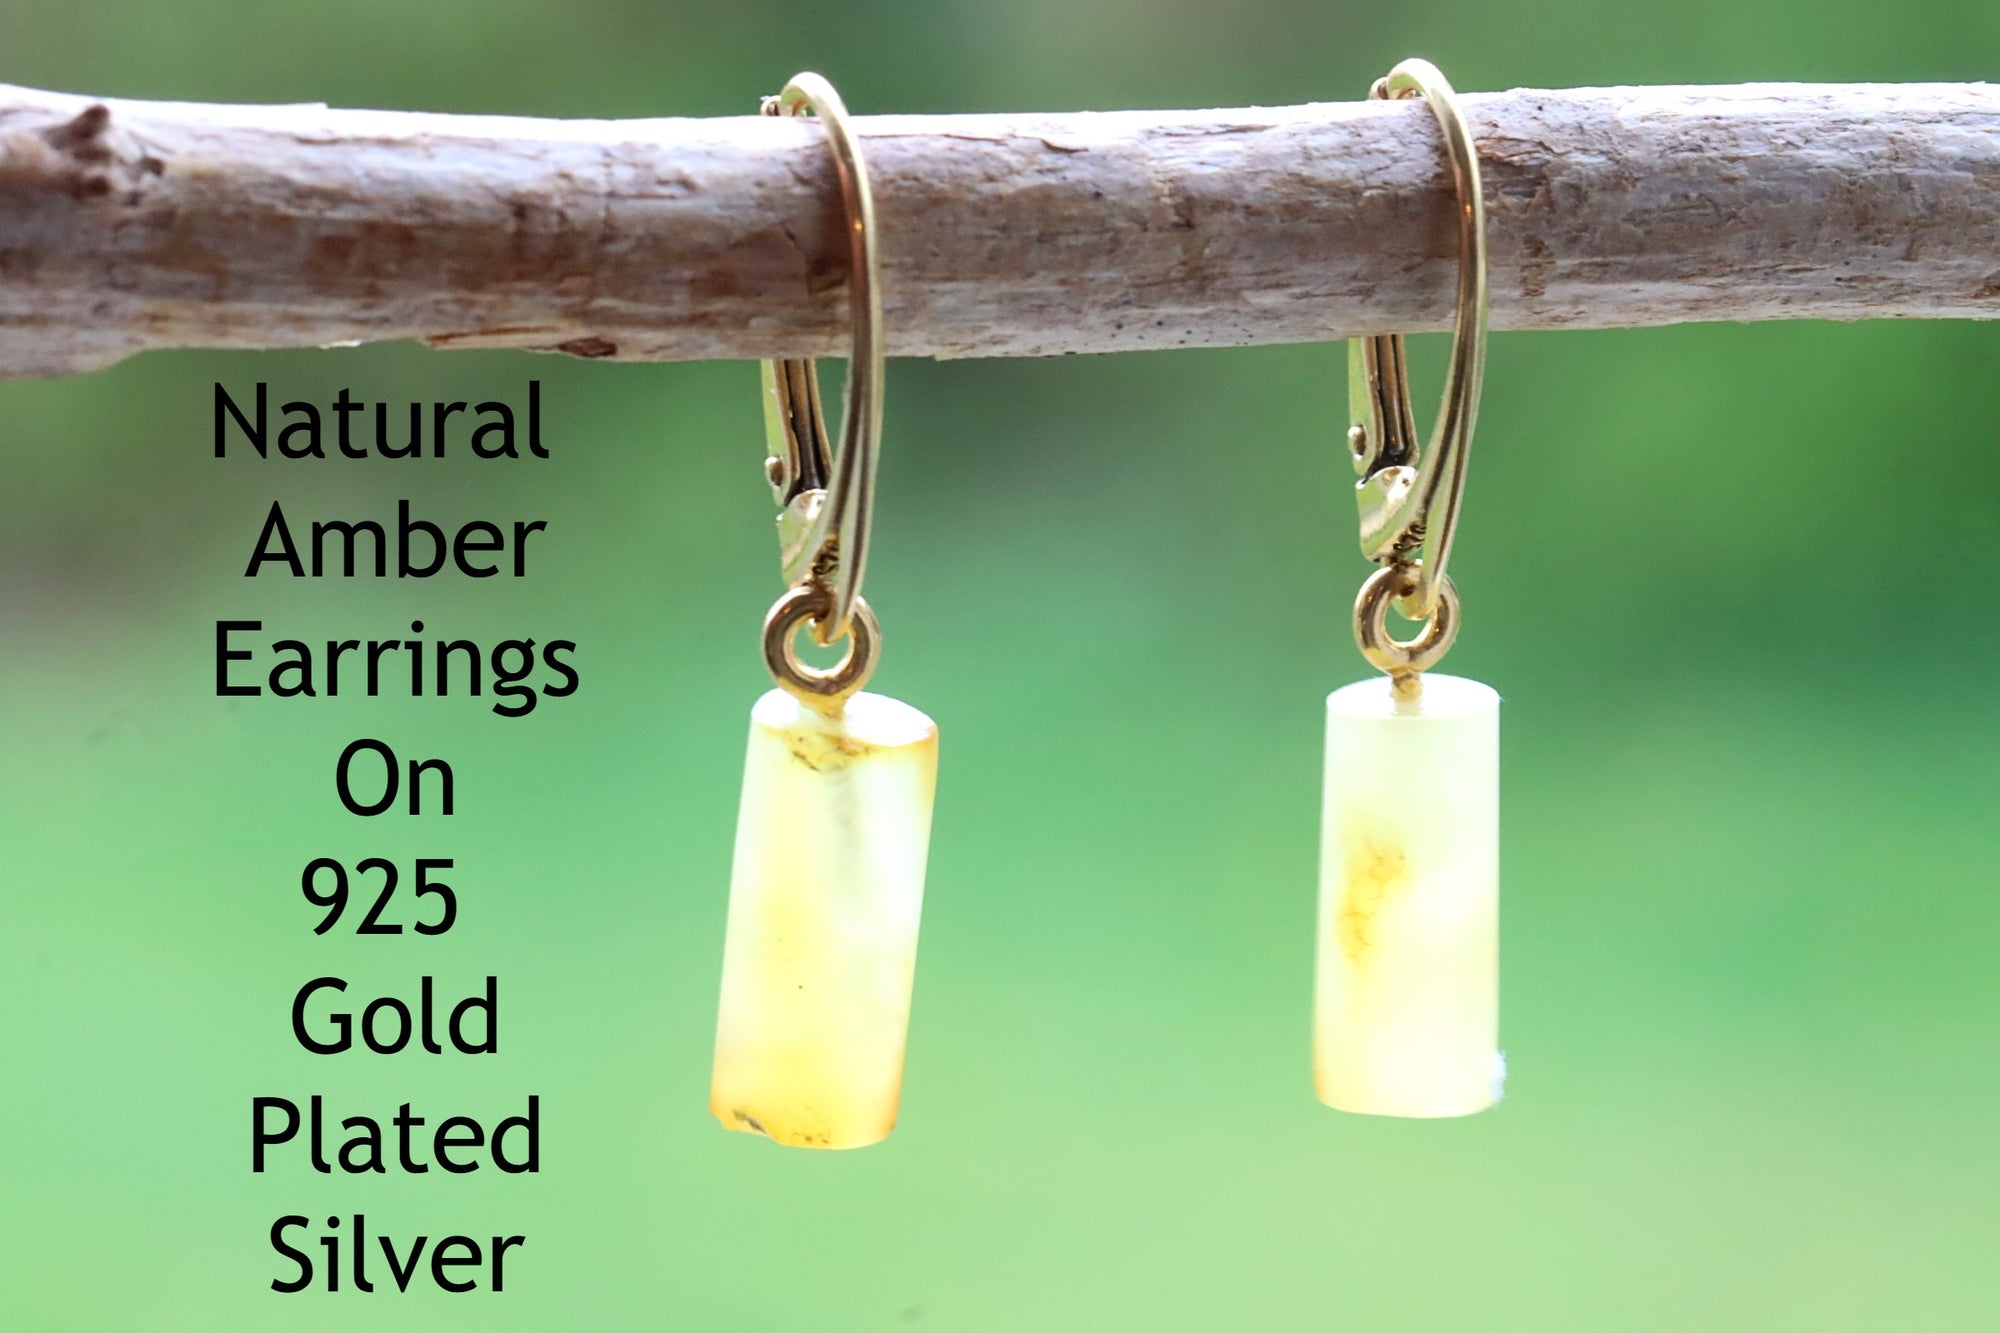 Gender Neutral Jewelry Natural Amber on Gold Plated Silver Earrings